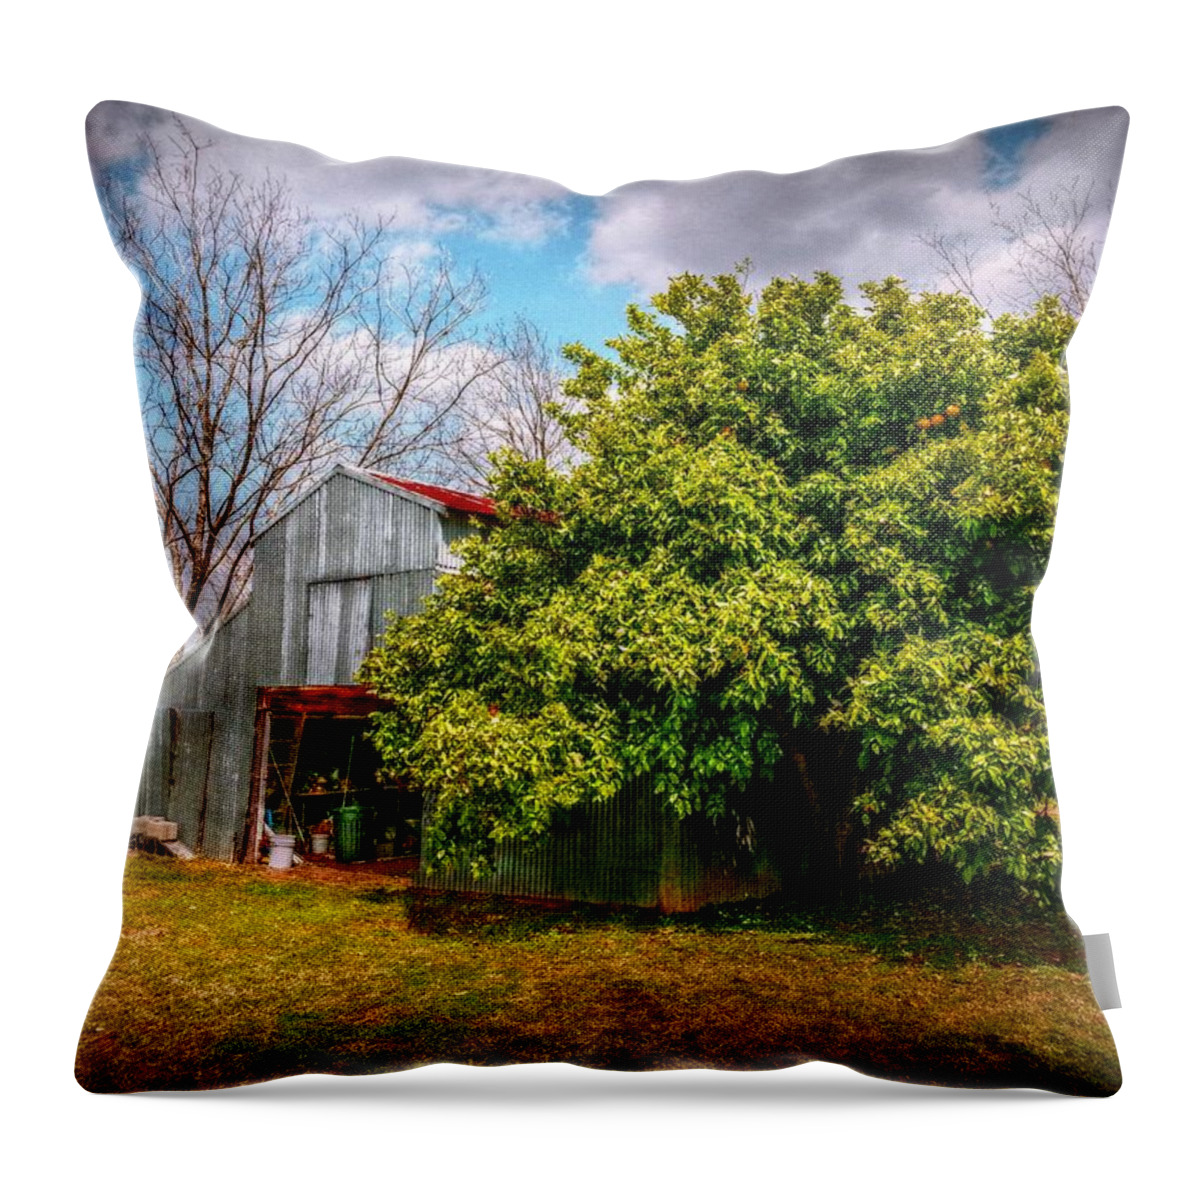 Grapefruit Trees Throw Pillow featuring the digital art The Miracle Tree by Linda Unger